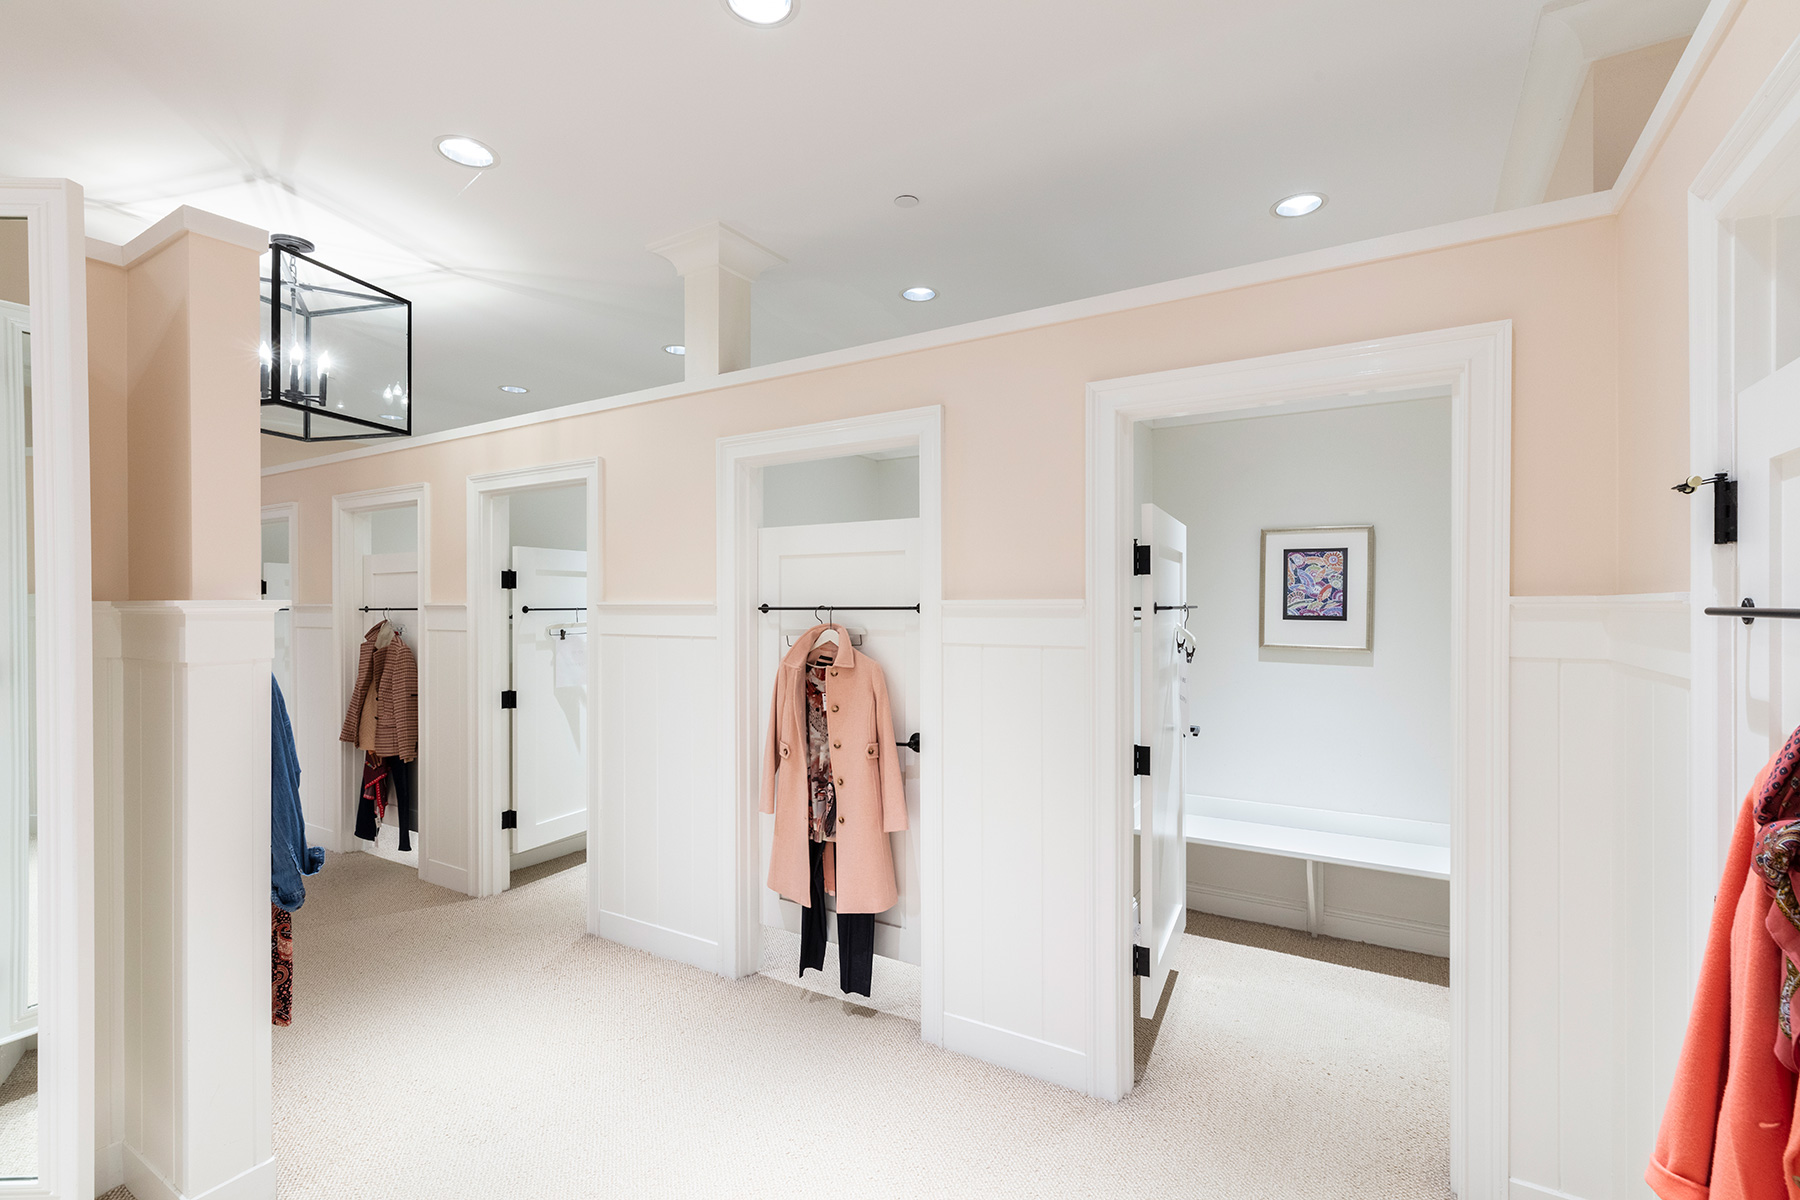 Inside of Talbots store, changing rooms